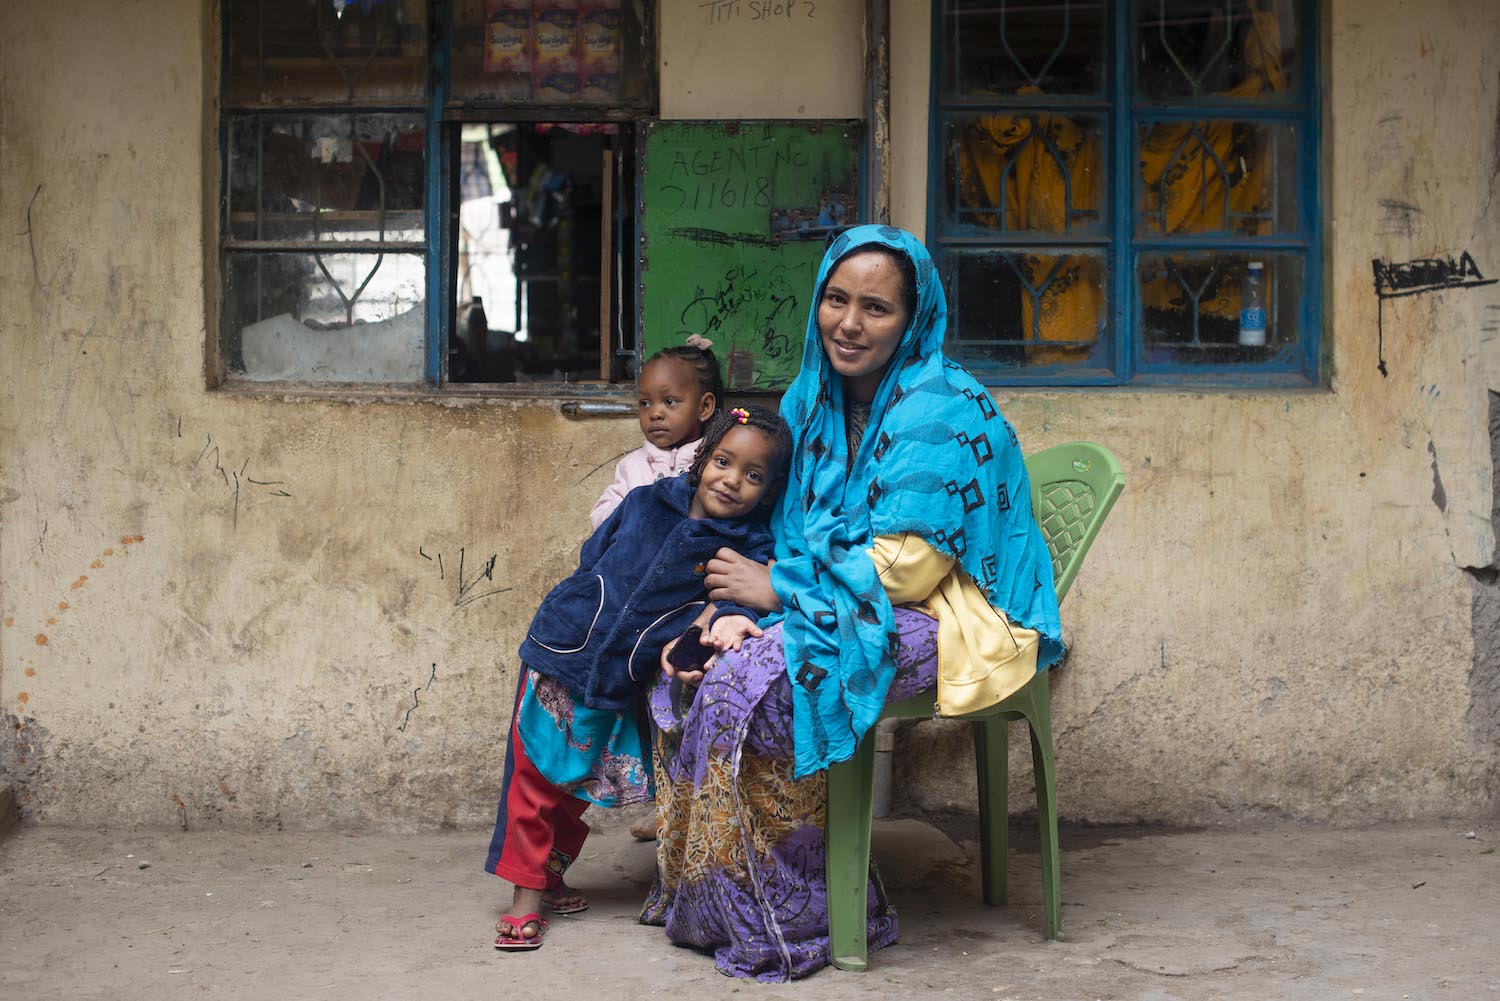 A woman with her two children, seeking support and assistance for their livelihood on